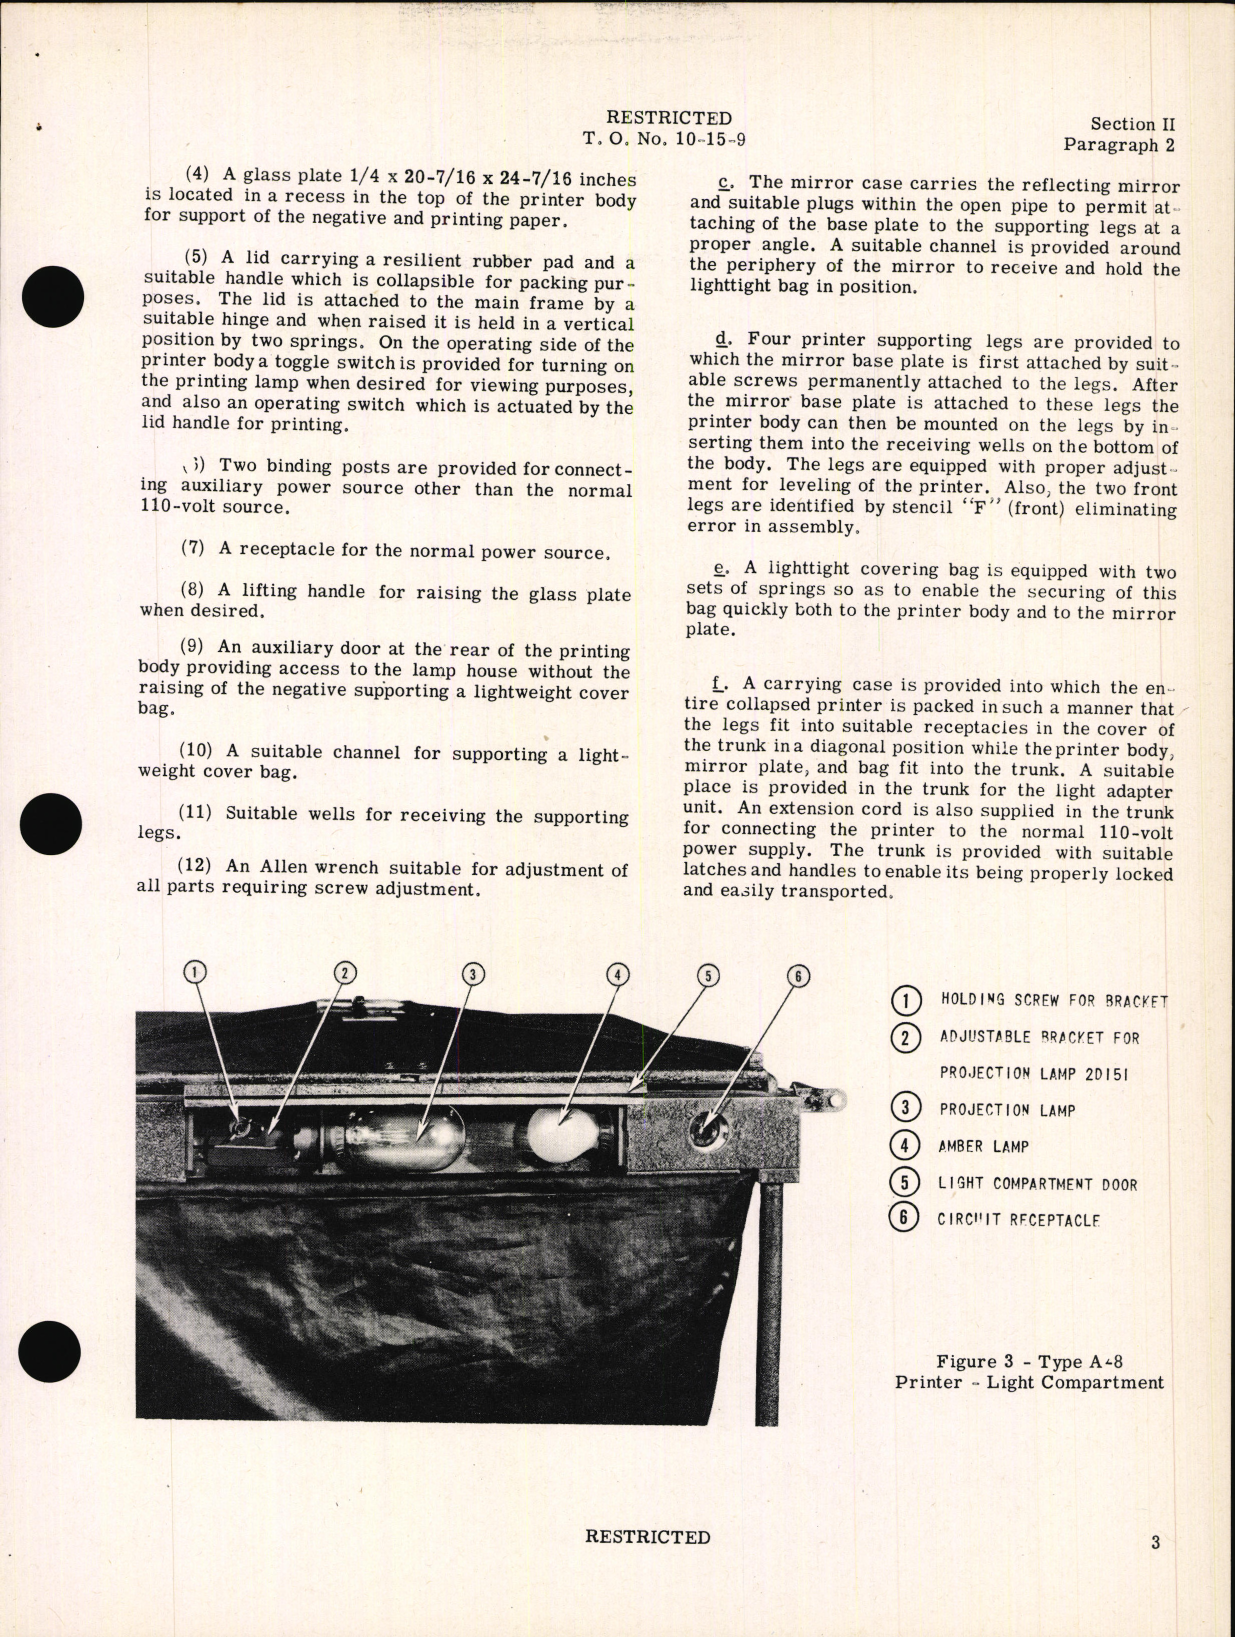 Sample page 7 from AirCorps Library document: Handbook of Instructions with Parts Catalog for Type A-8 Contact Printer for Type A Portable Laboratories